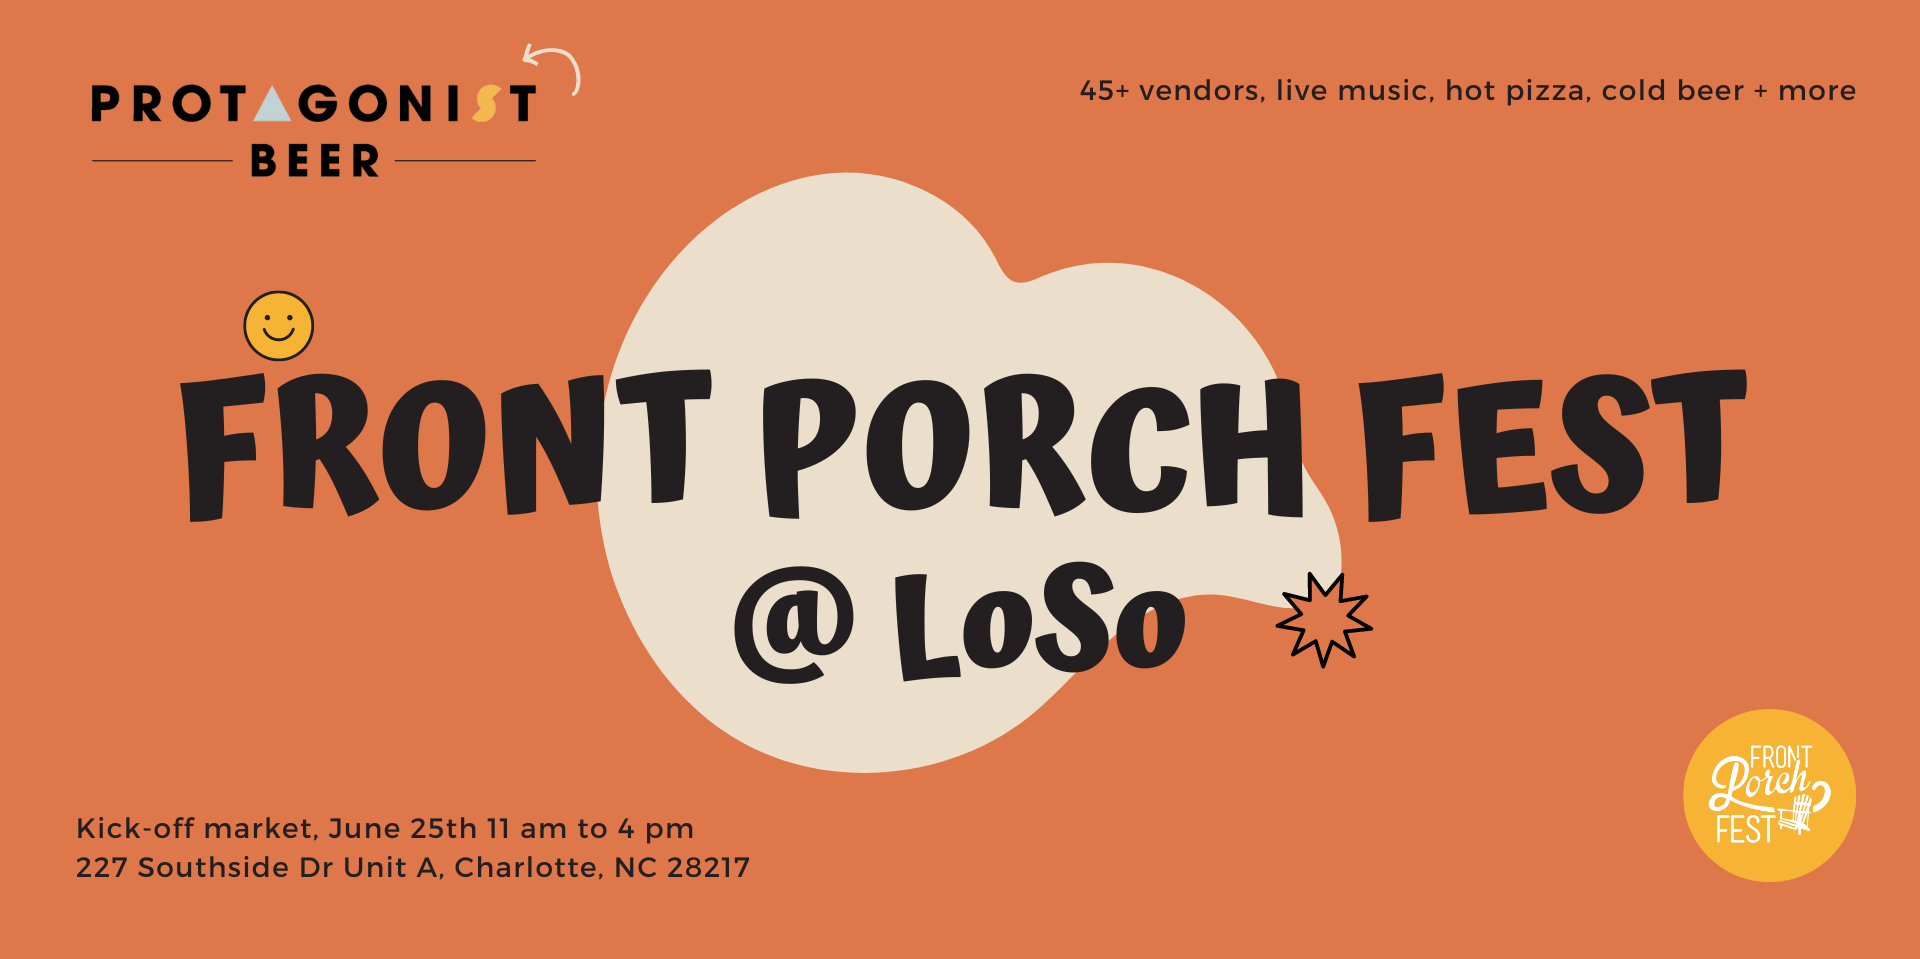 Front Porch Fest at LoSo promotional image